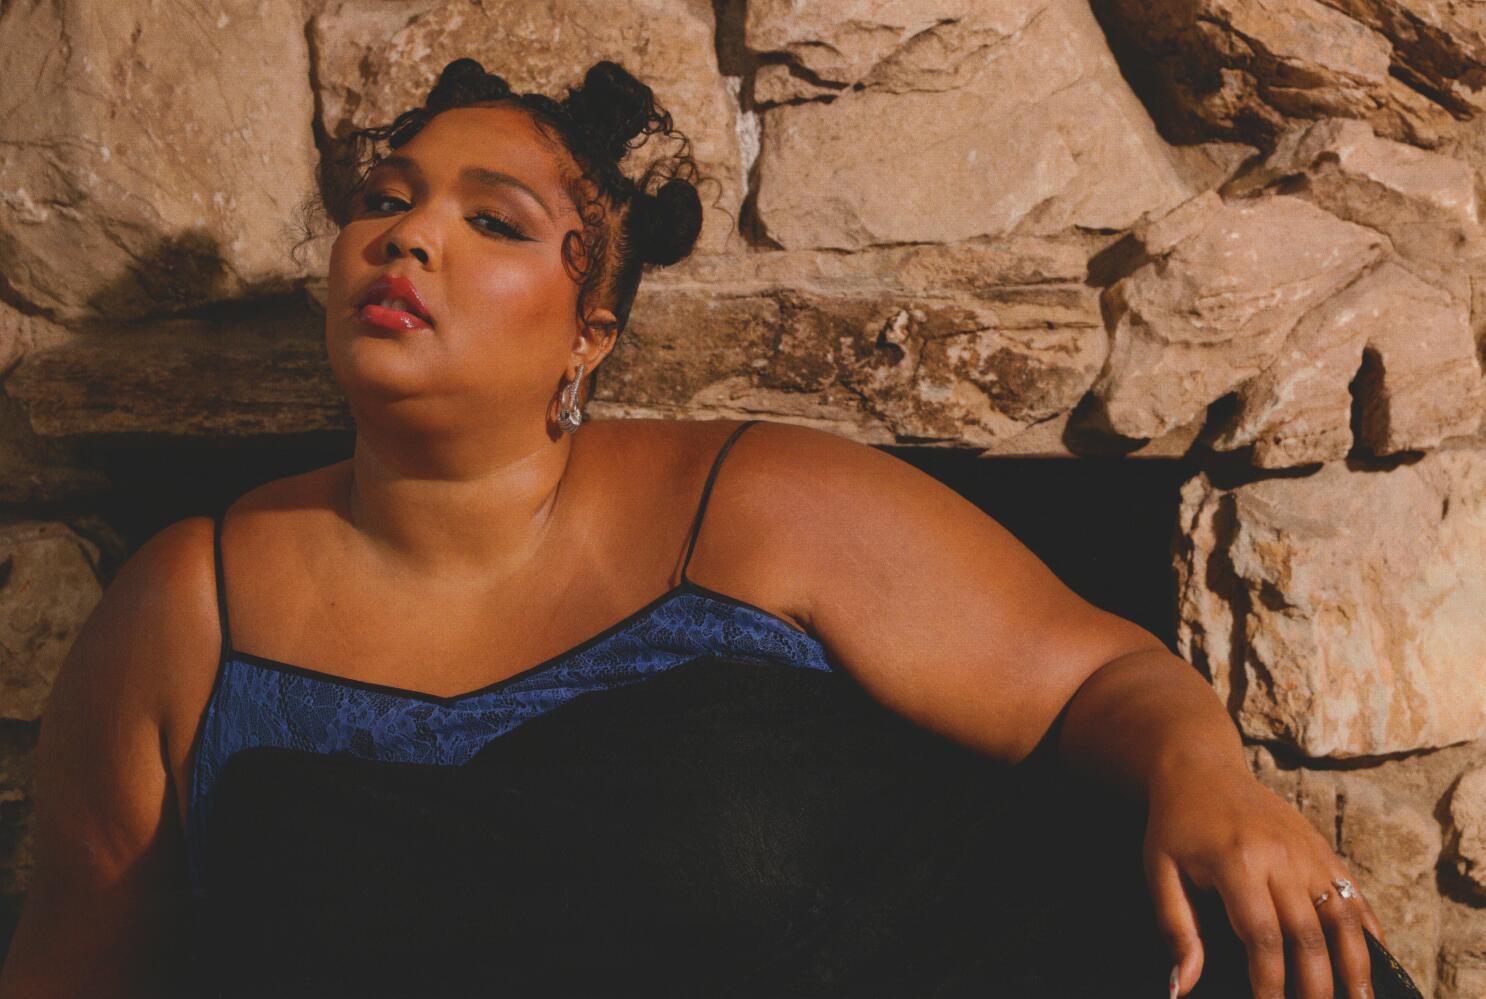 Lizzo's YITTY Collection Aims To Change the Way We Look at Shapewear